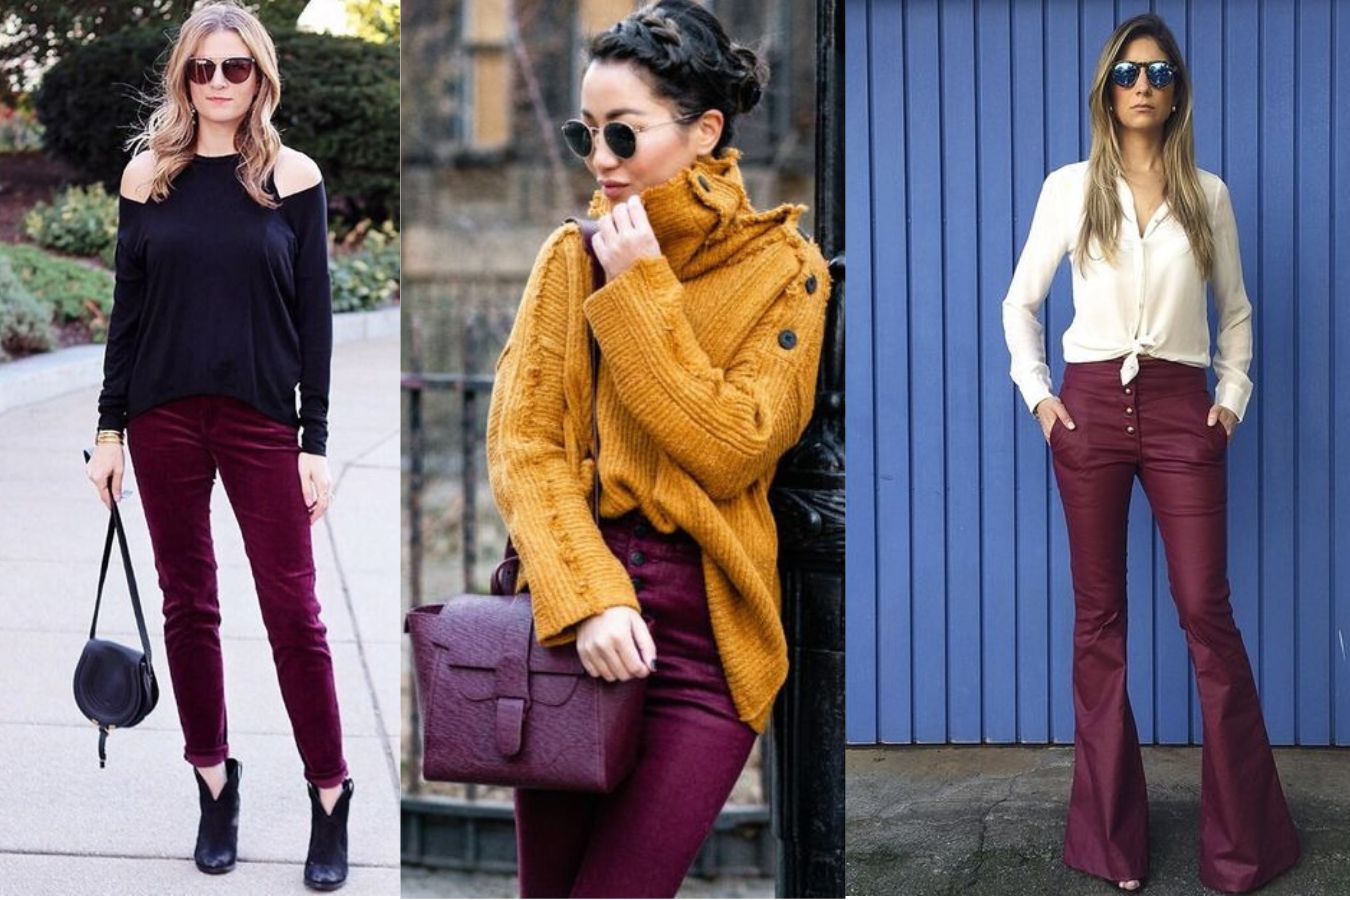 What Colors Shirts Go Well With Burgundy Pants